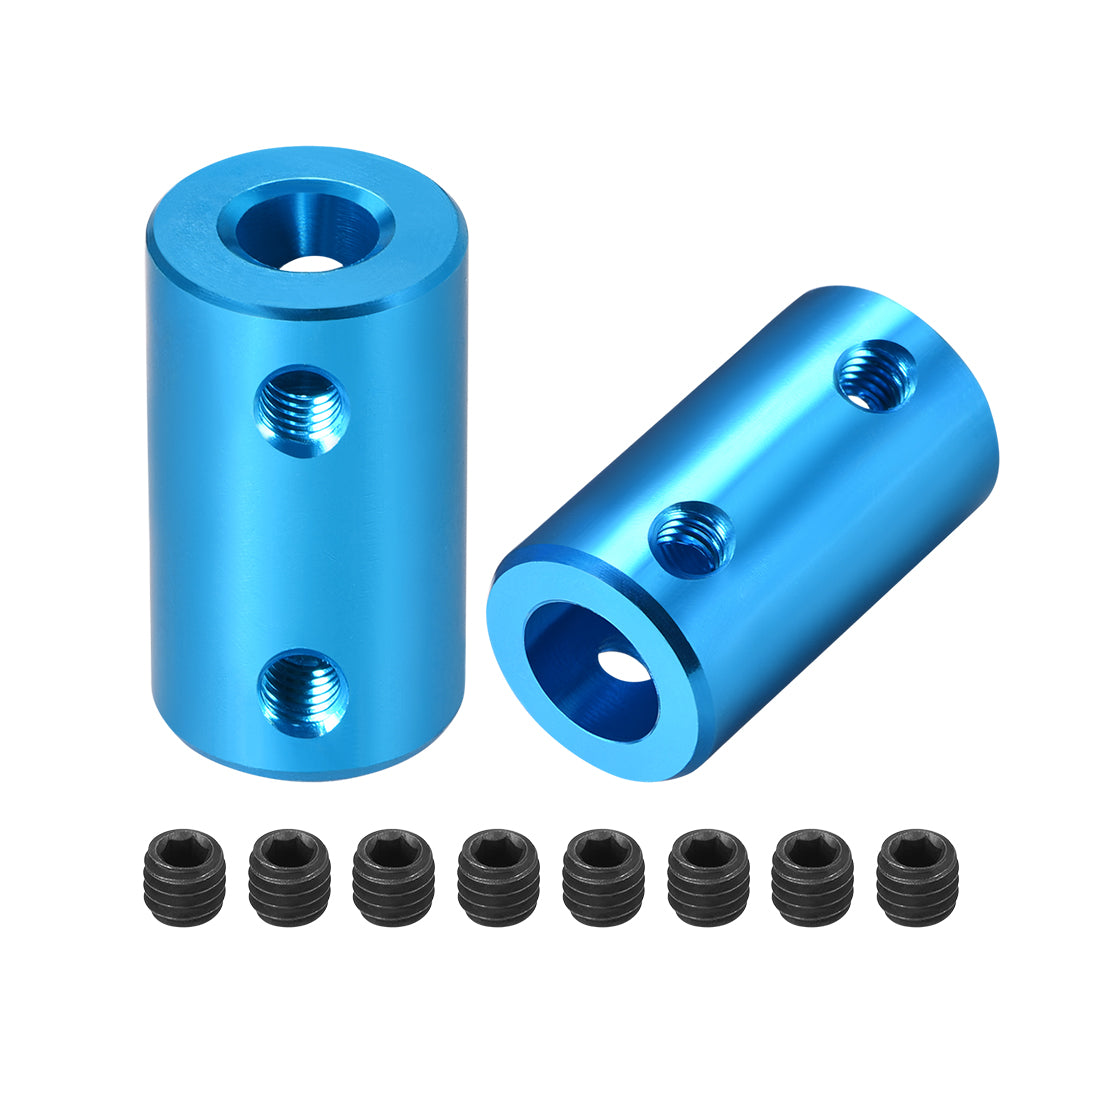 uxcell Uxcell Shaft Coupling 6mm to 8mm Bore L25xD14 Robot Motor Wheel Rigid  Connector Blue 2 Pcs